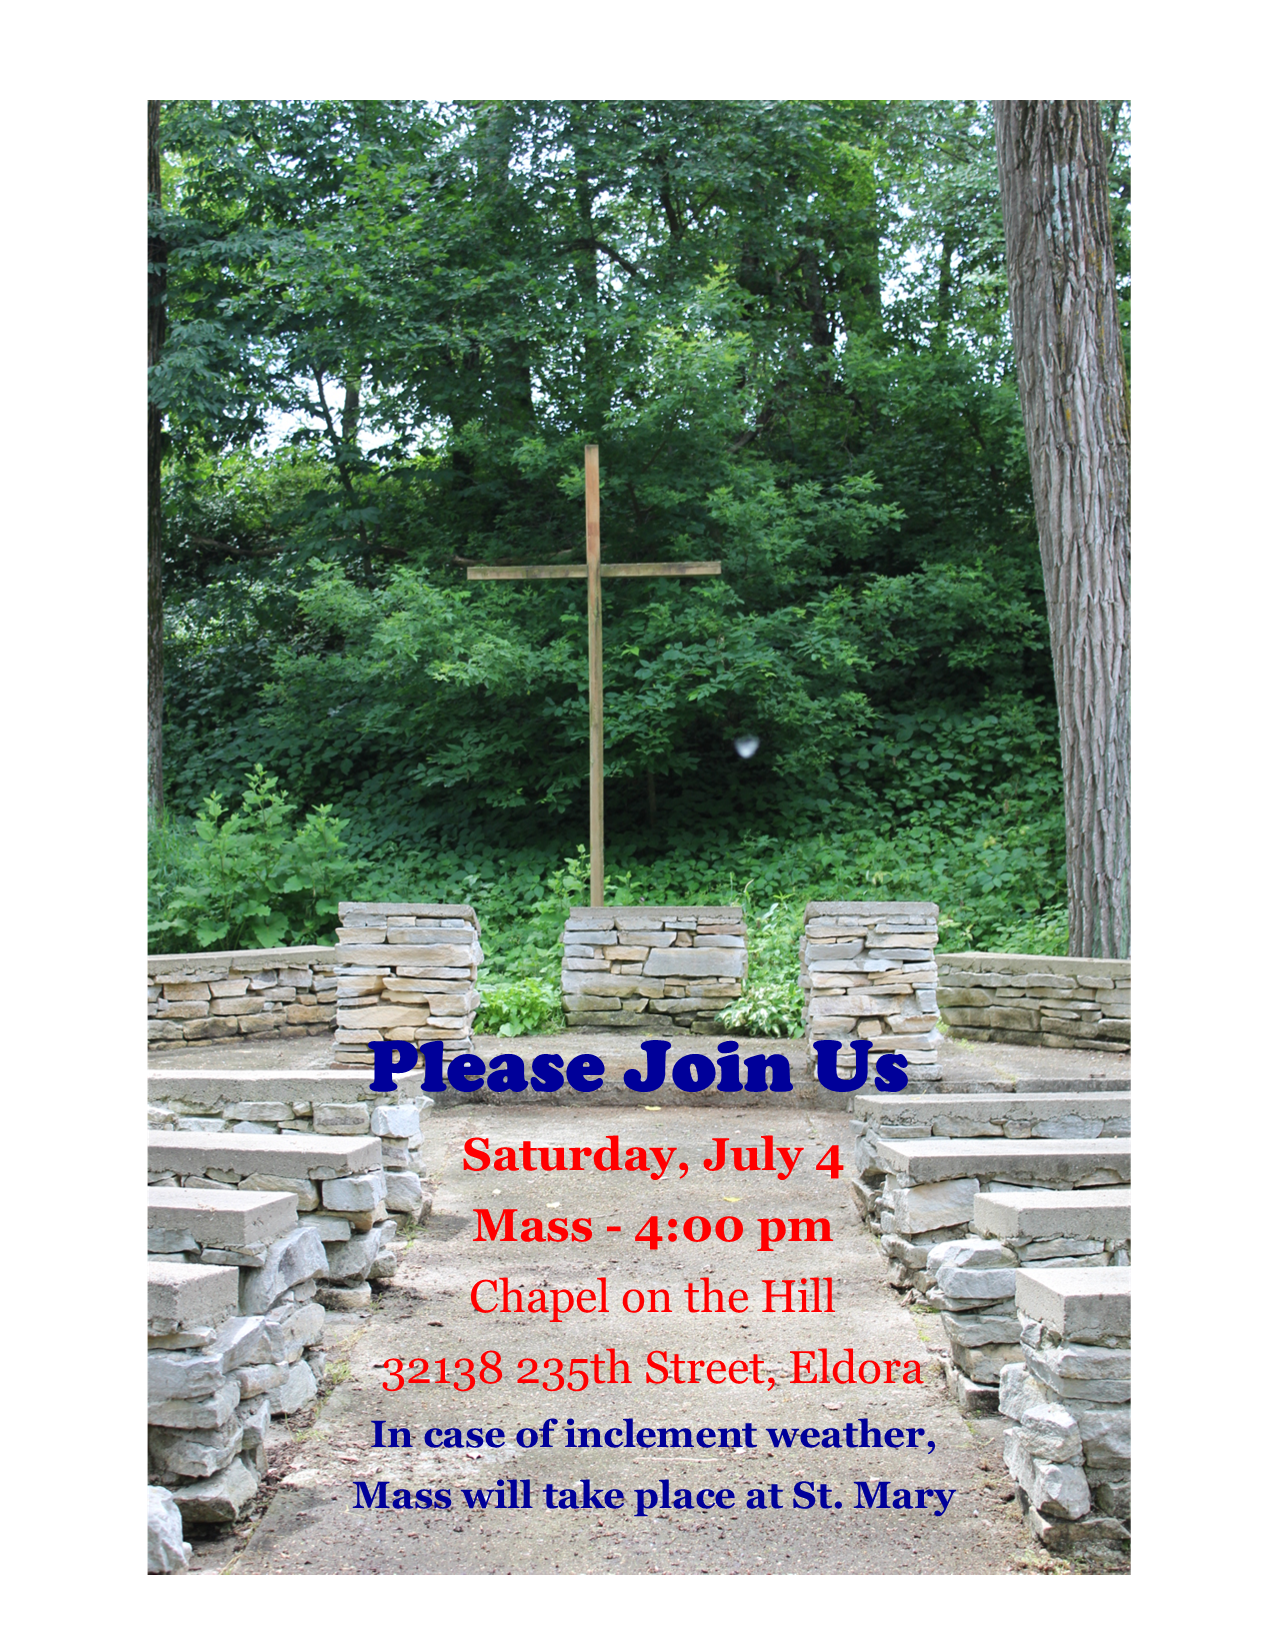 Outdoor Mass July 4 at 4:00 PM